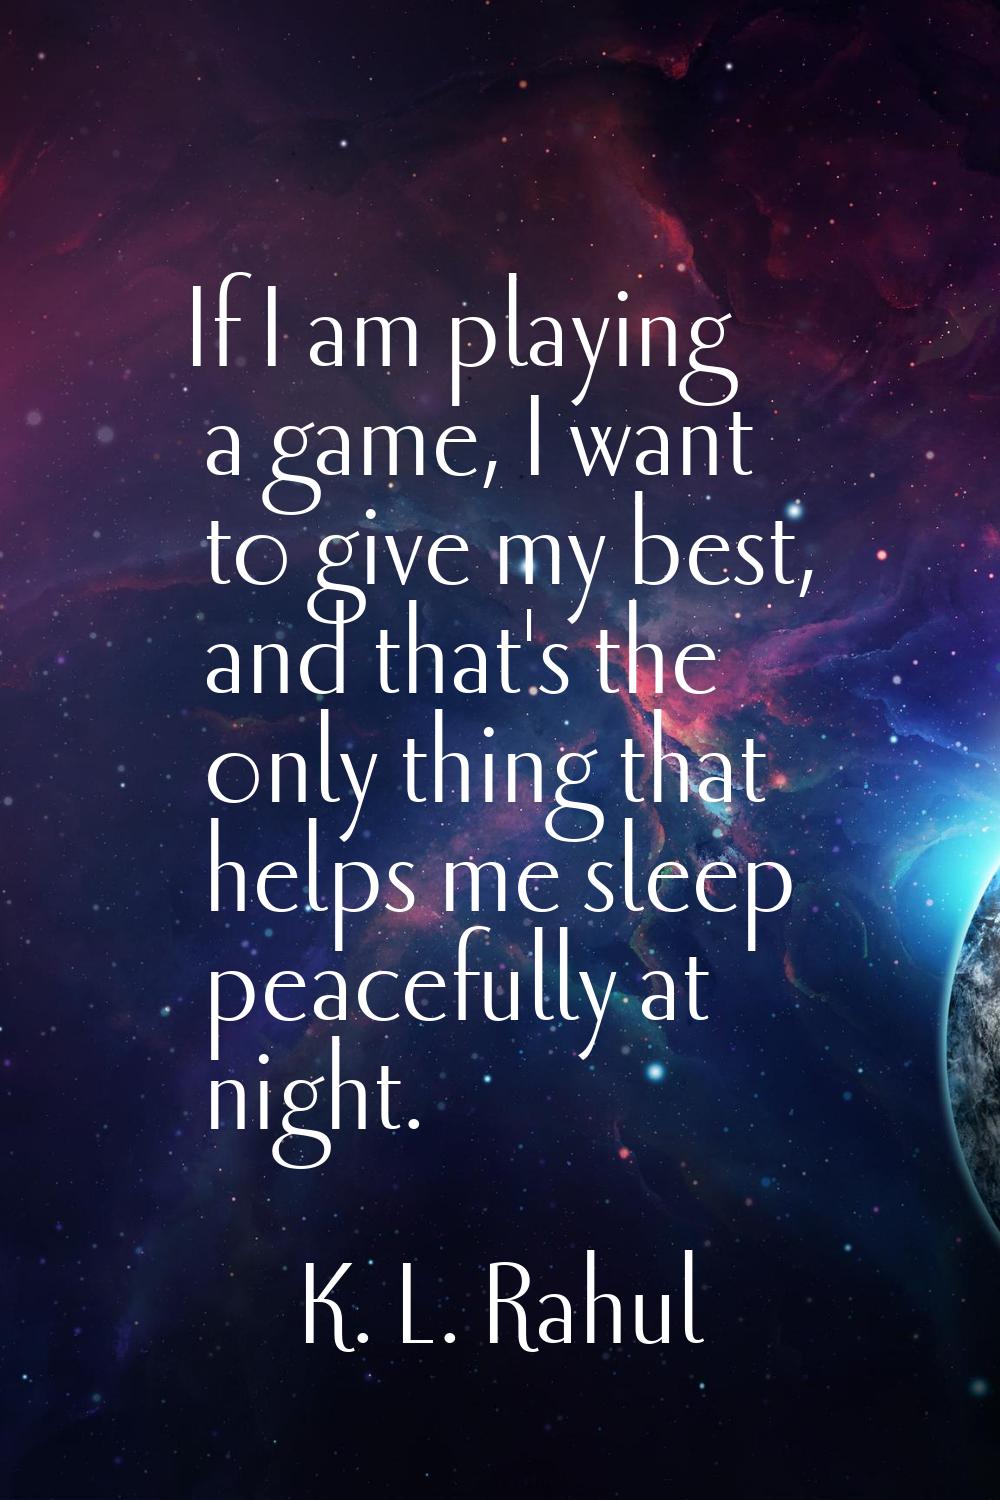 If I am playing a game, I want to give my best, and that's the only thing that helps me sleep peace